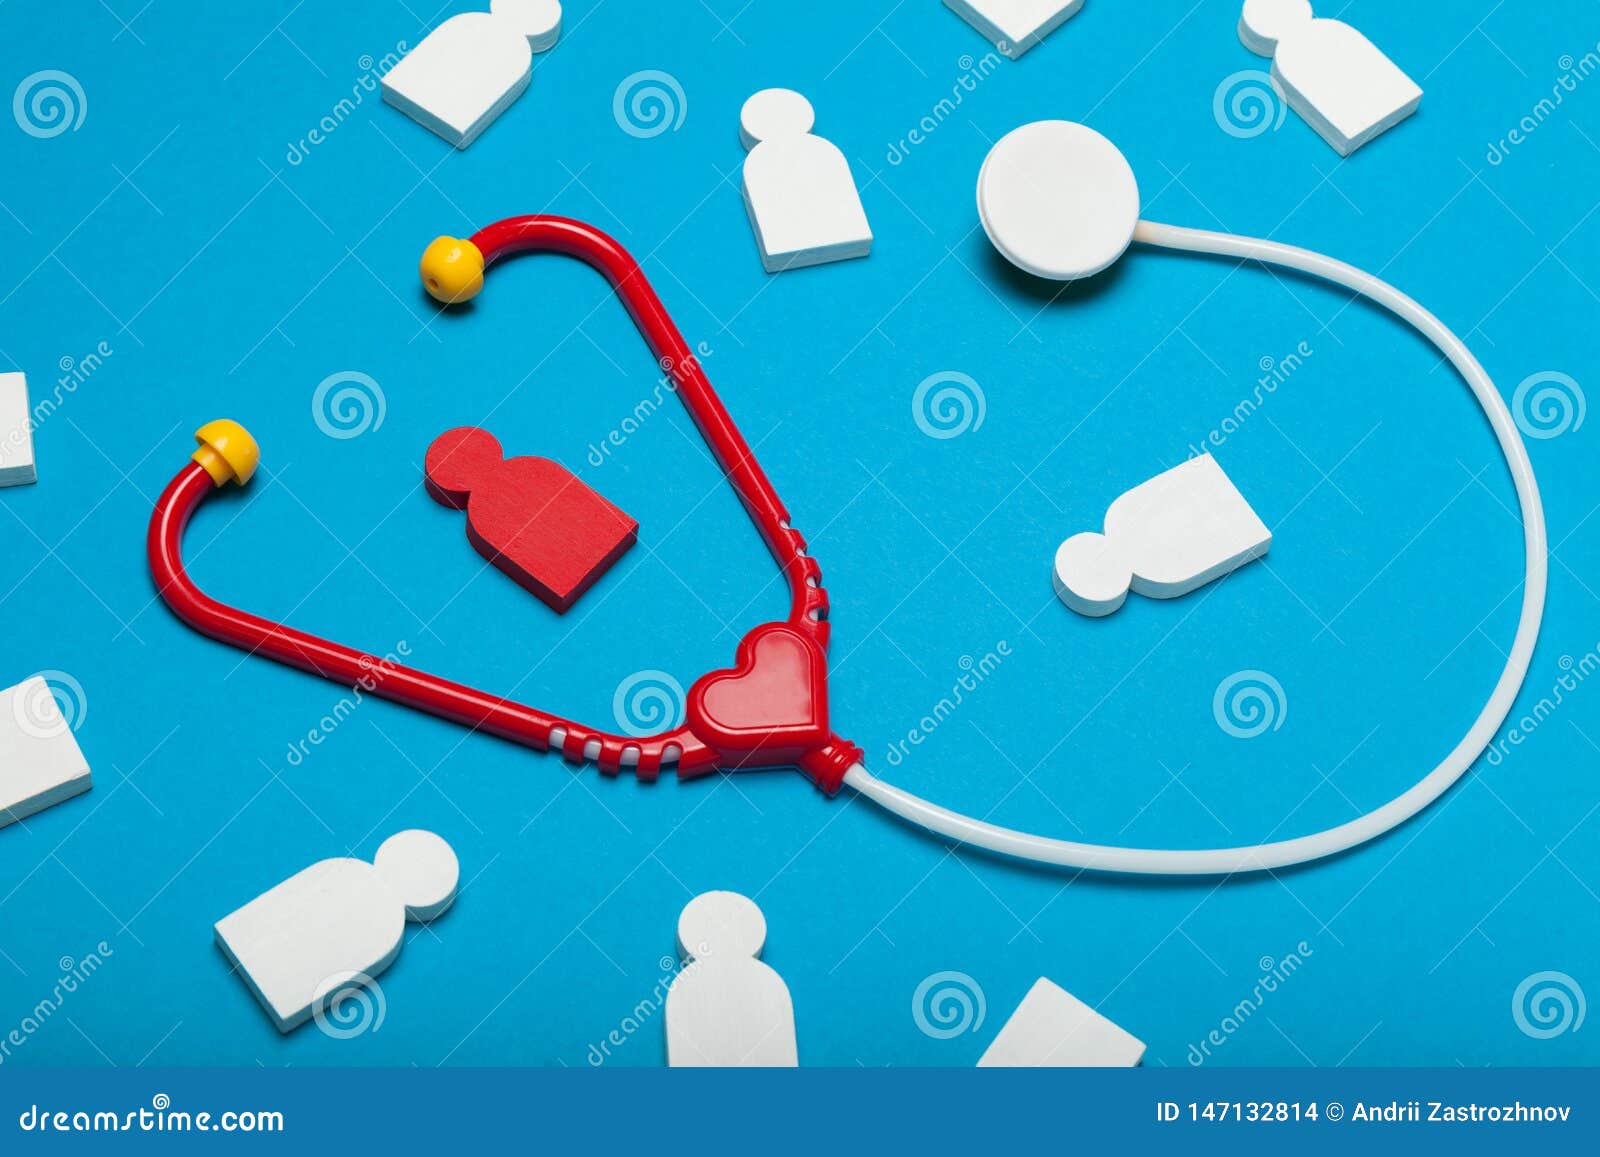 baby heart auscultation, cardiology disease concept. clinical stethoscope